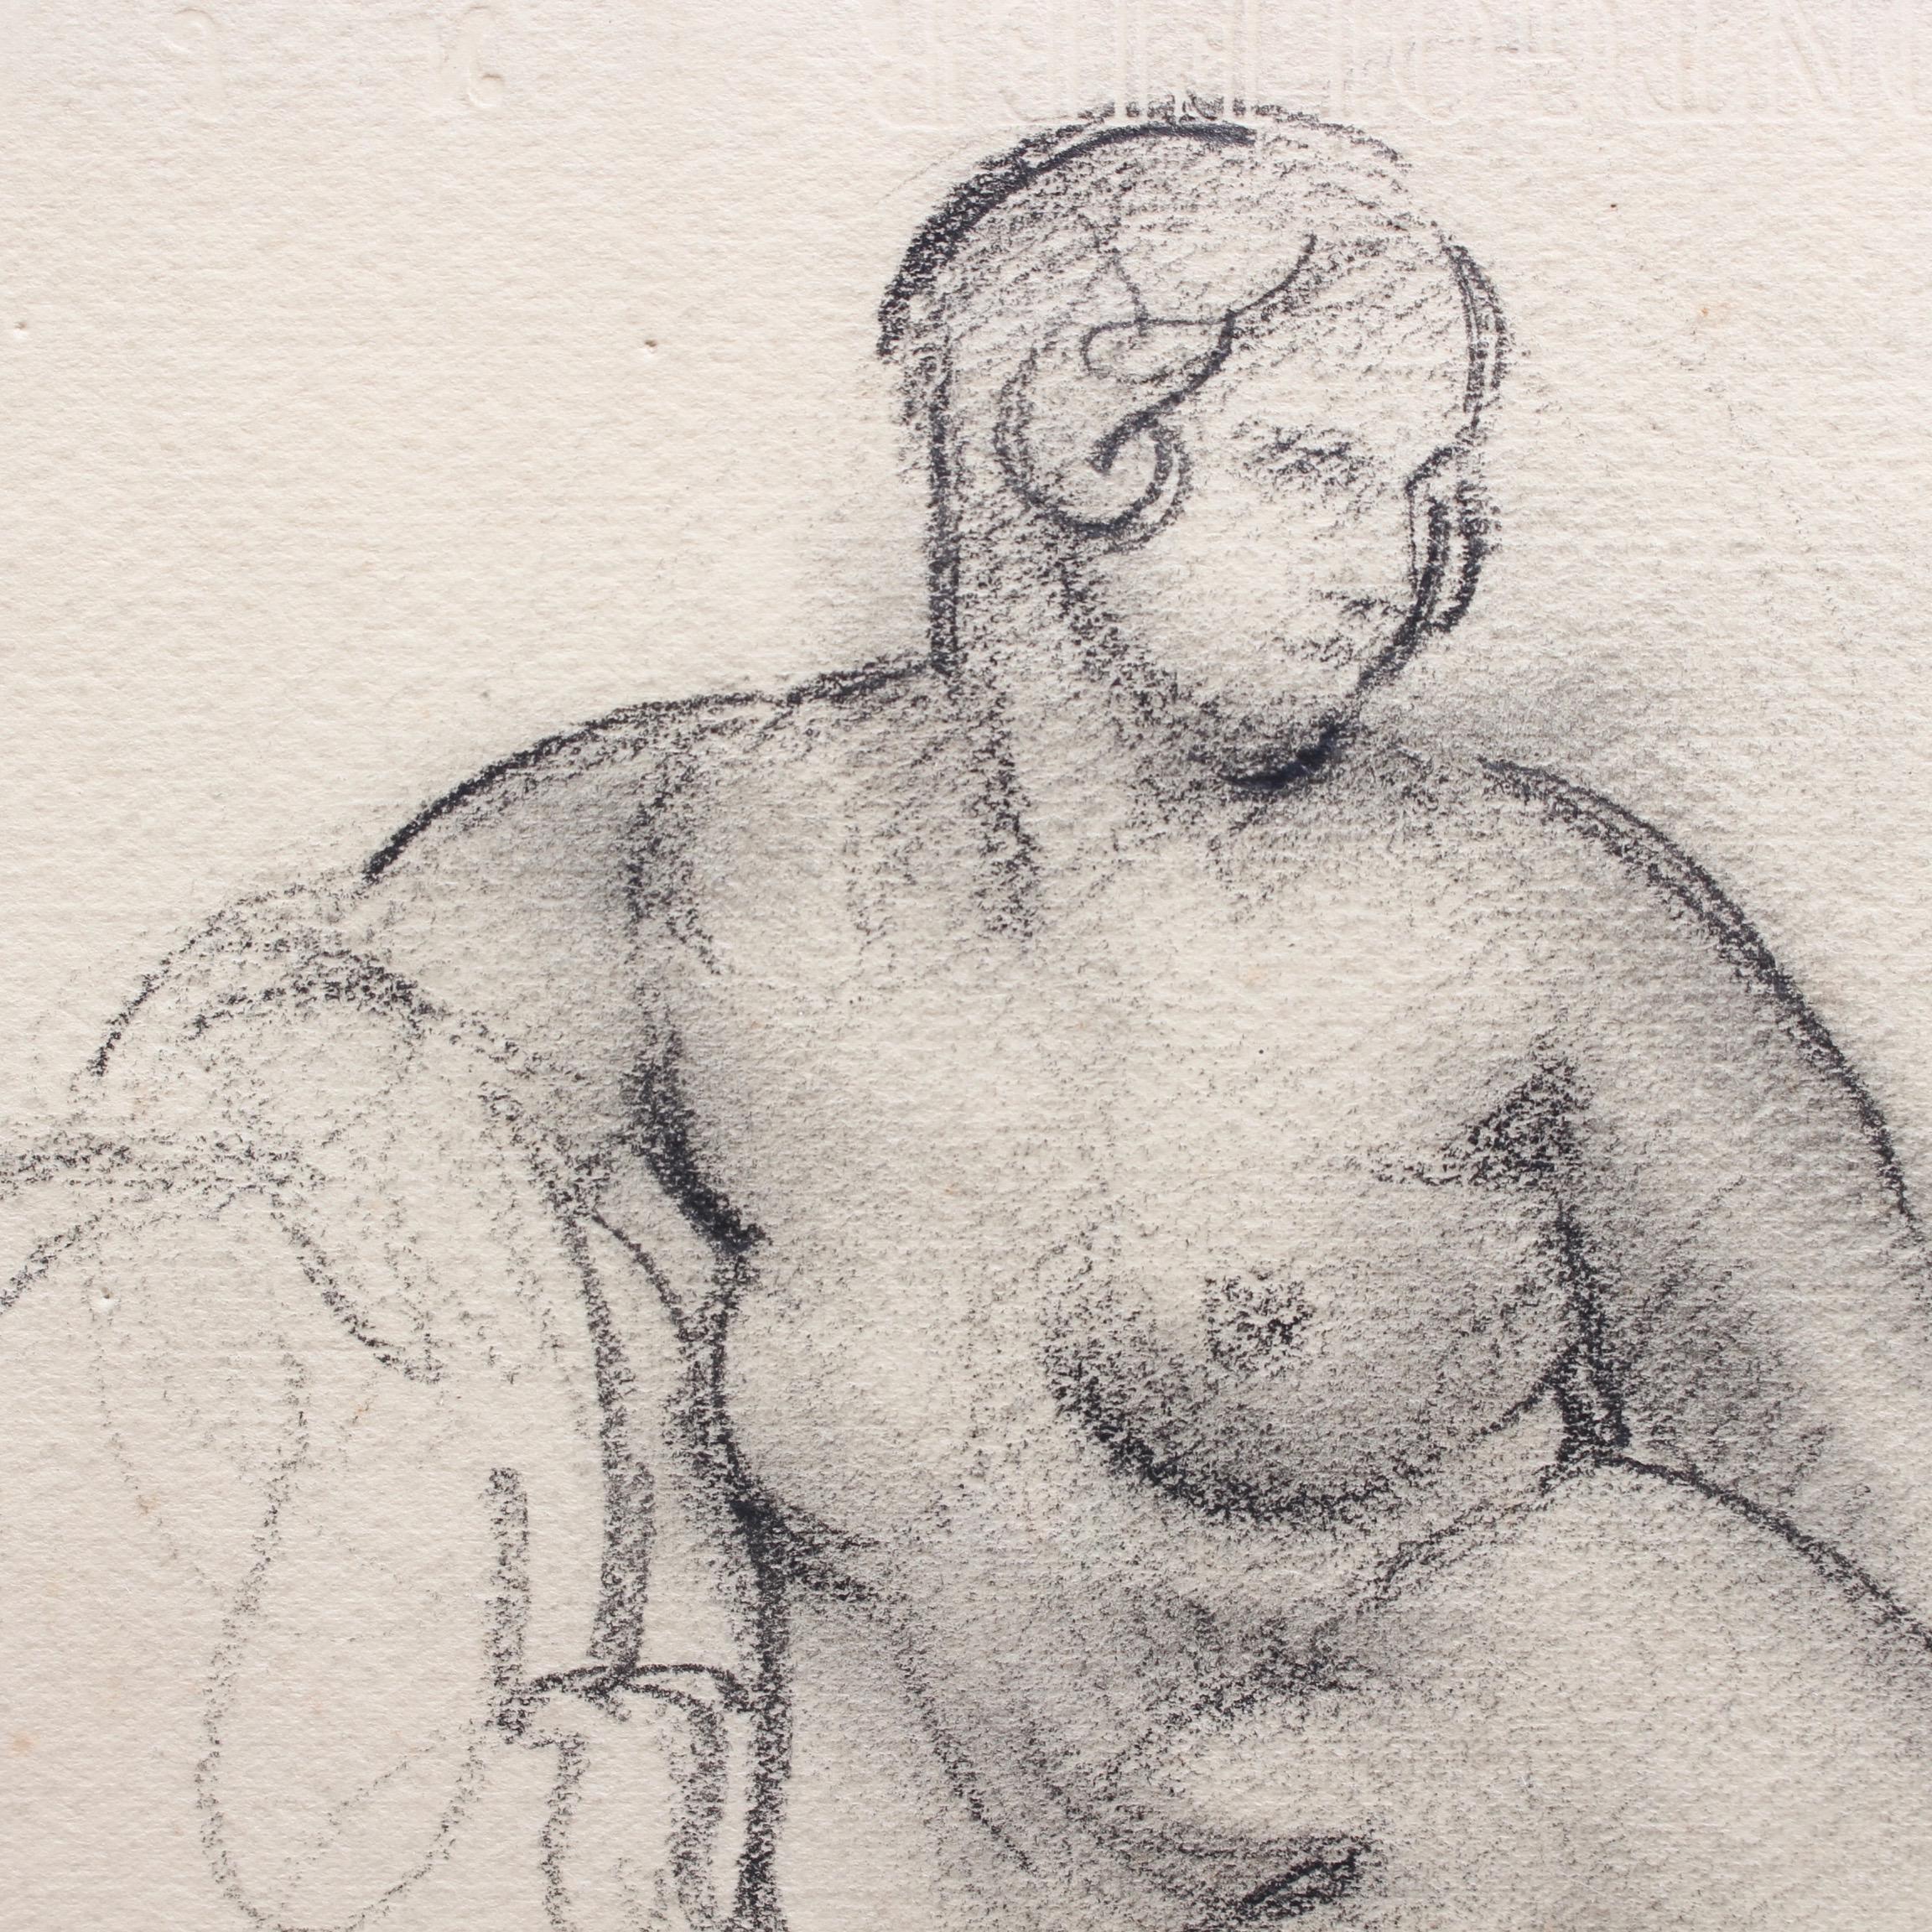 'Portrait of Reposing Nude', pencil on fine art paper, by French artist, Guillaume Dulac (circa 1920s). An artist known for his exquisite drawings - many are sketches for his larger oil paintings or other works - this piece is compelling because its